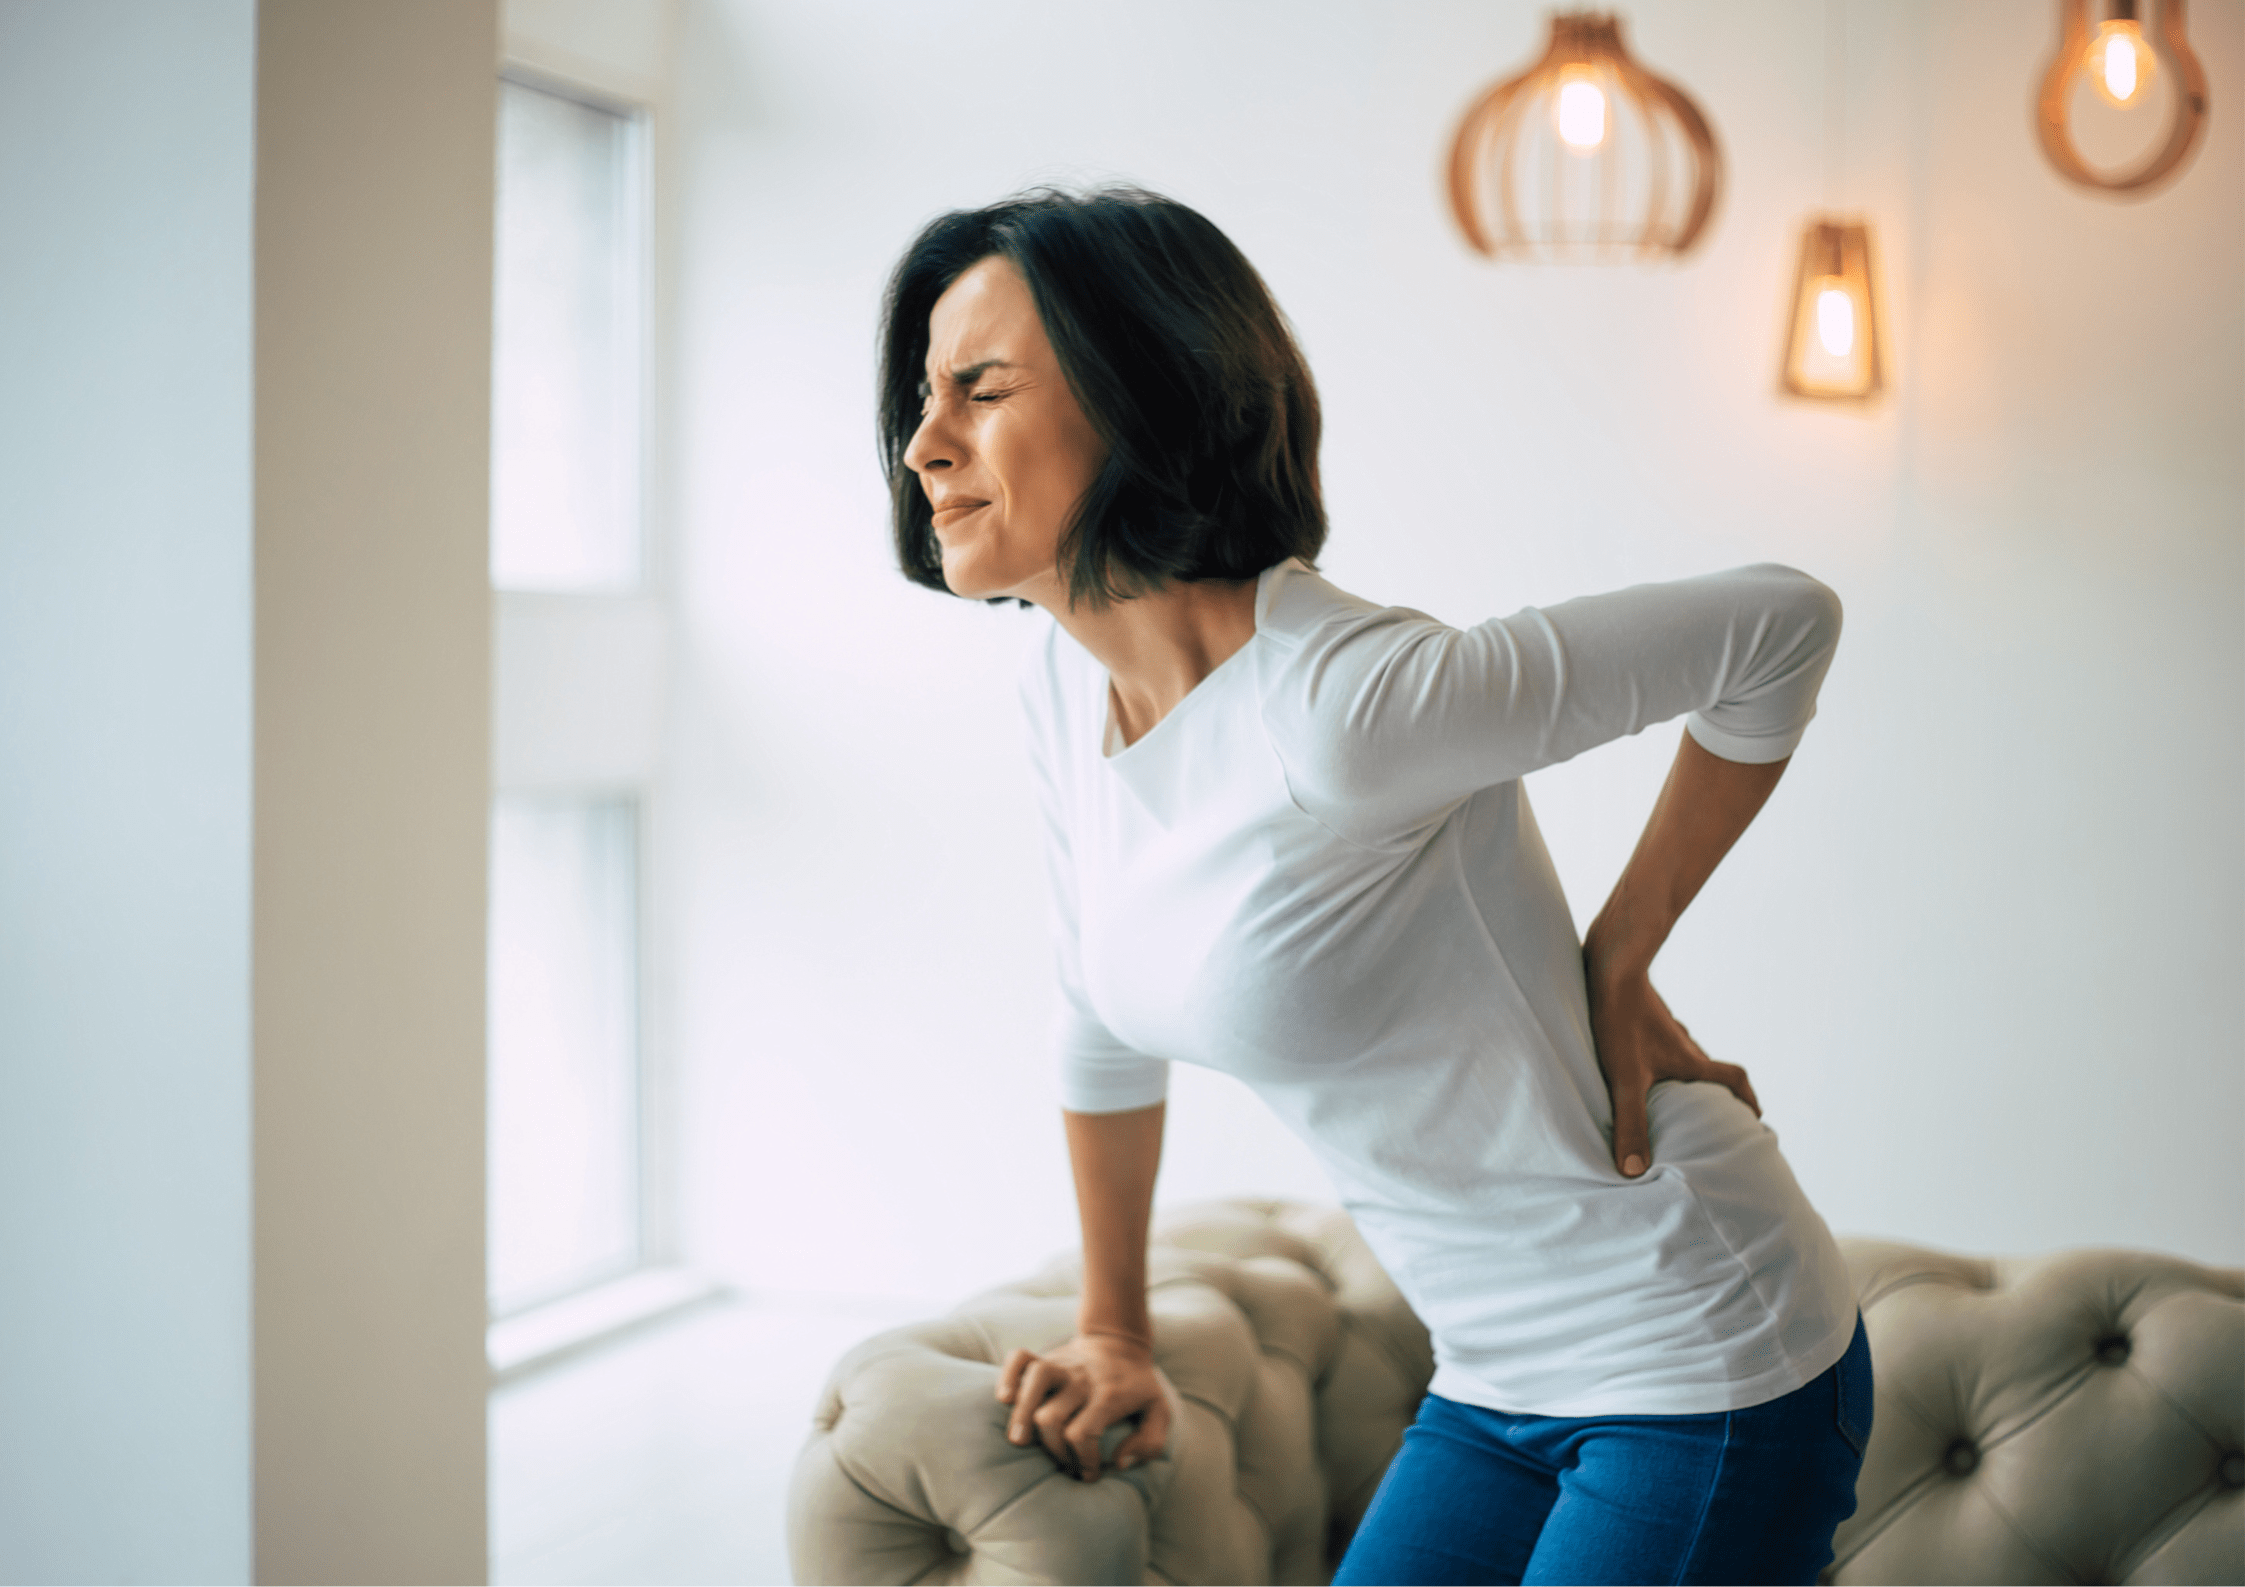 Back pain: Electrotherapy could help ease an achy back